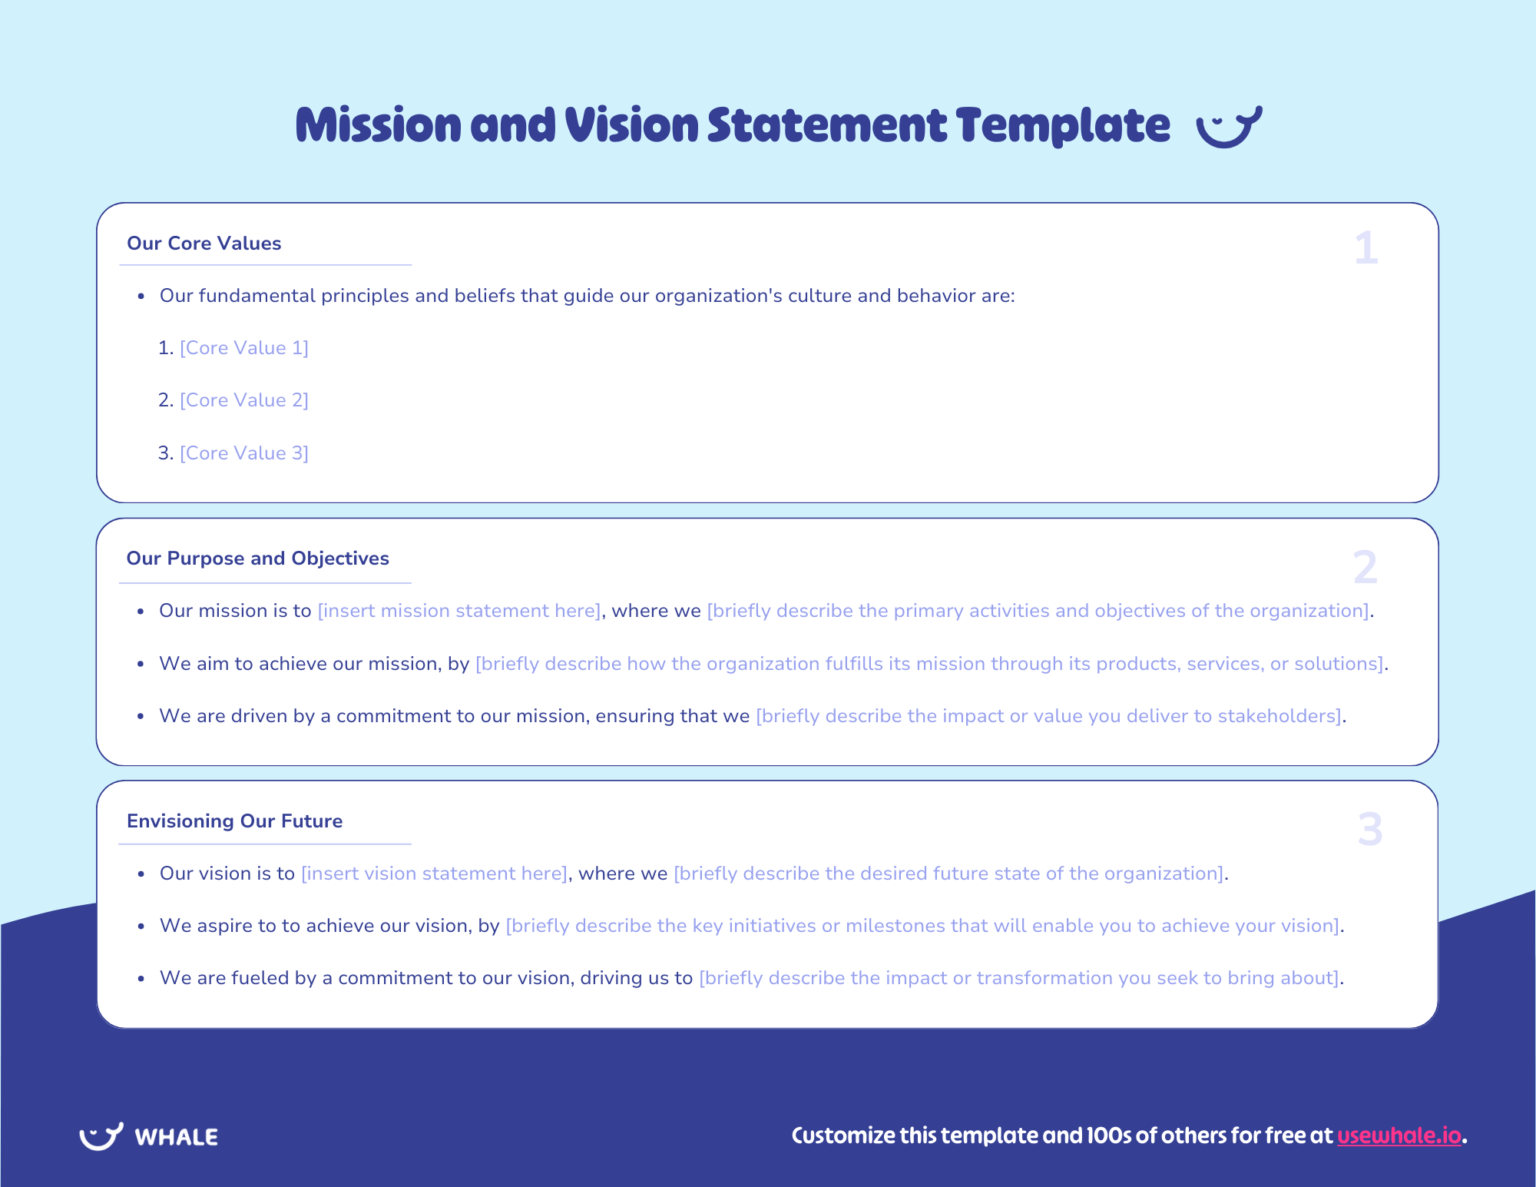 Image of a "mission and vision statement template" with sections for core values, mission statement, and vision statement, and editable fields.